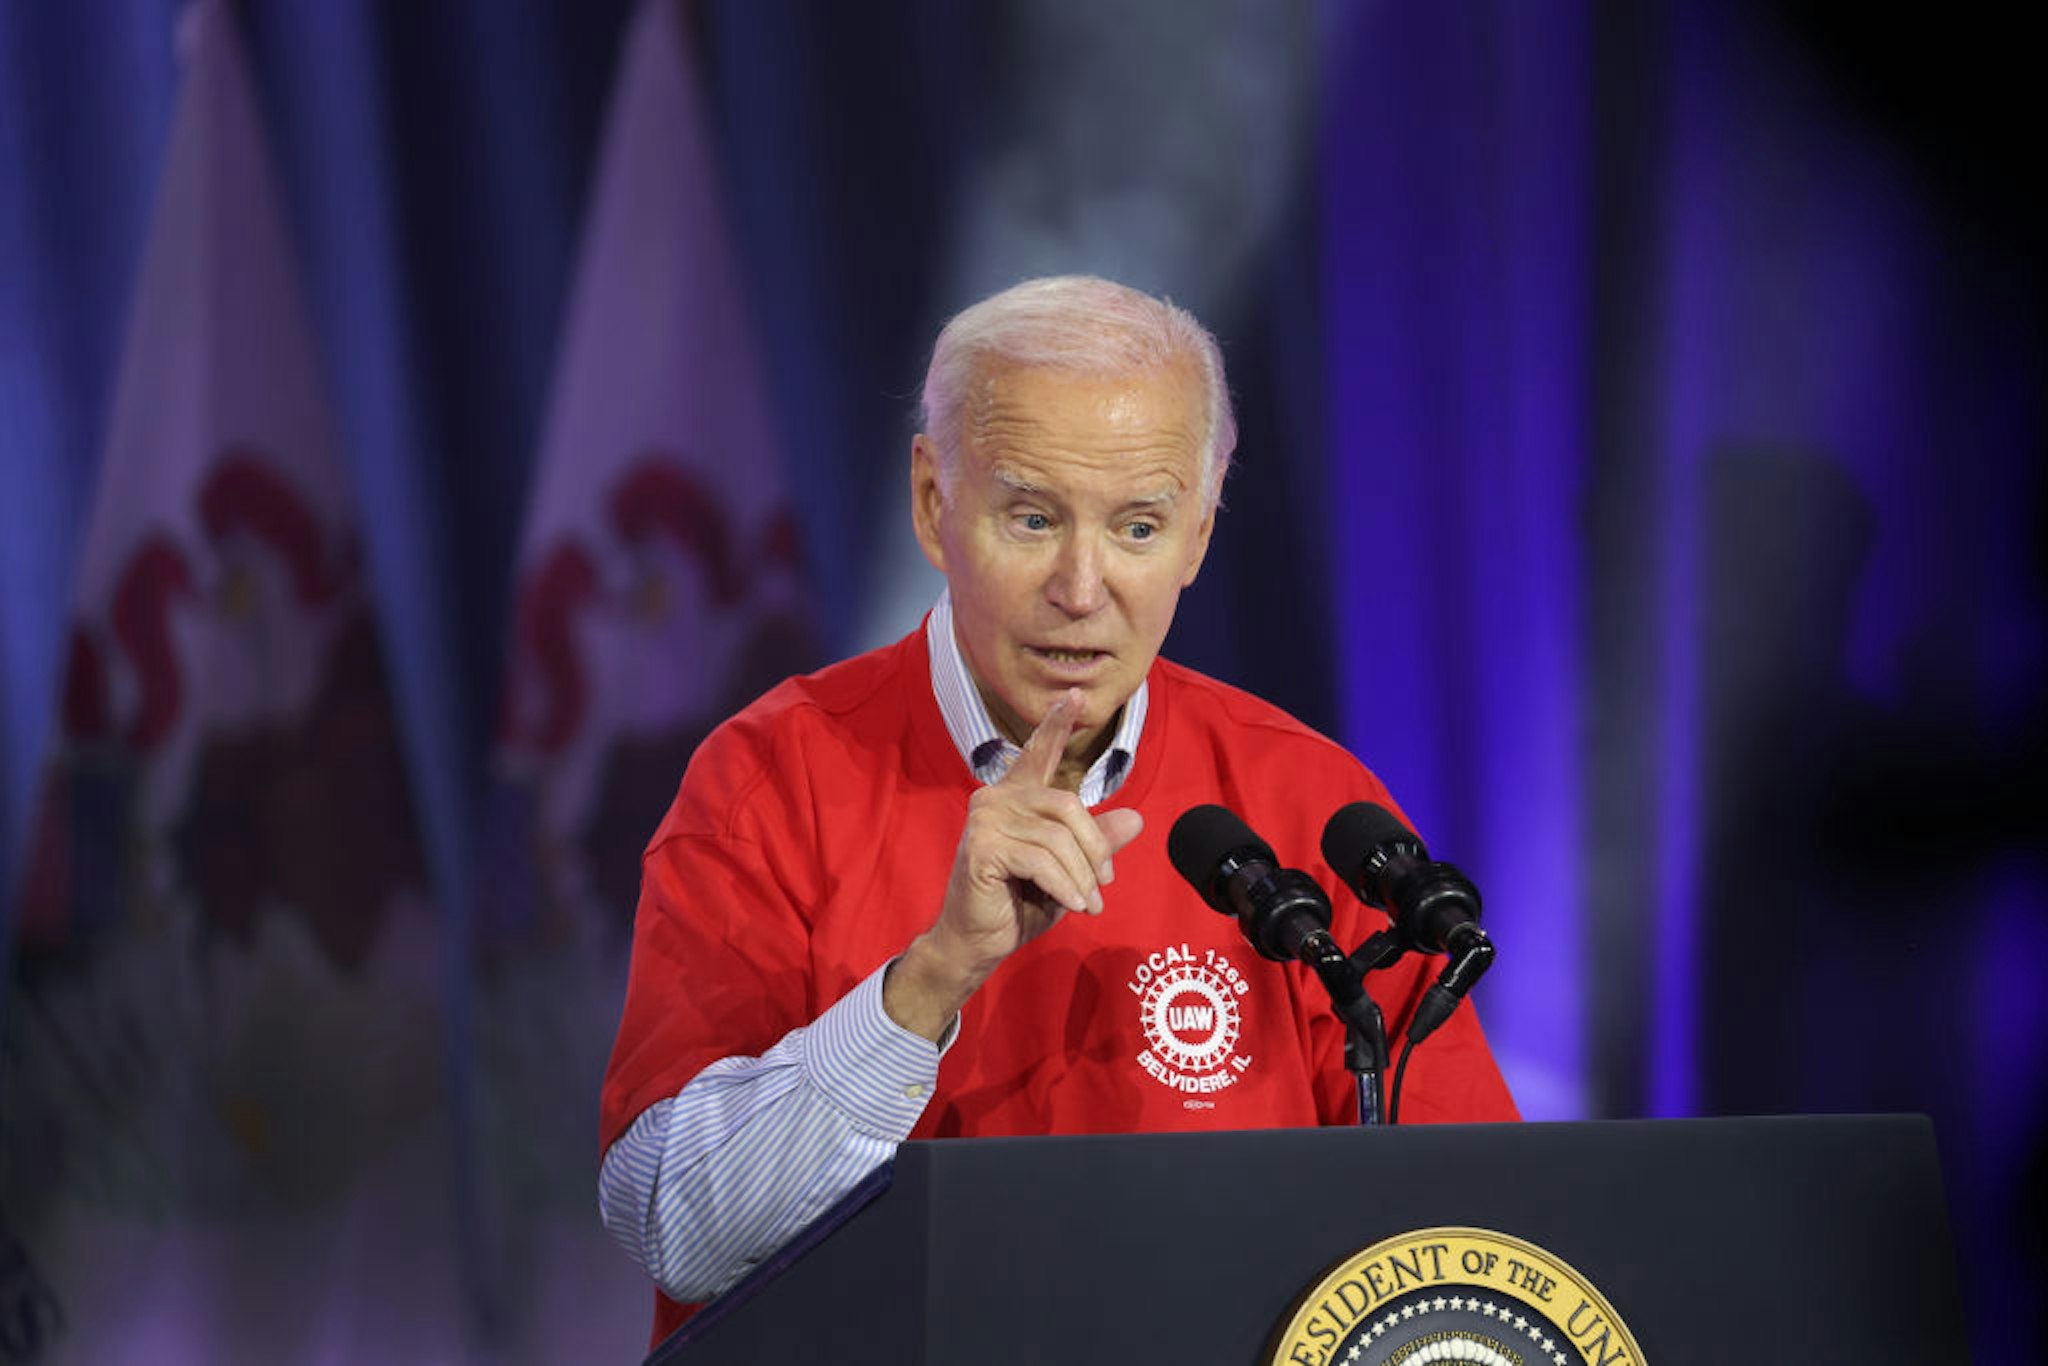 BELVIDERE, ILLINOIS - NOVEMBER 09: President Joe Biden speaks to autoworkers at the Community Complex Building on November 09, 2023 in Belvidere, Illinois. Biden was in Belvidere to celebrate the scheduled reopening of Stellantis' Belvidere Assembly Plant and the settlement of the United Auto Workers (UAW) strike. Stellantis has agreed to build a new midsize pickup truck and open a new electric vehicle battery plant at the Belvidere facility which has been shuttered since February.